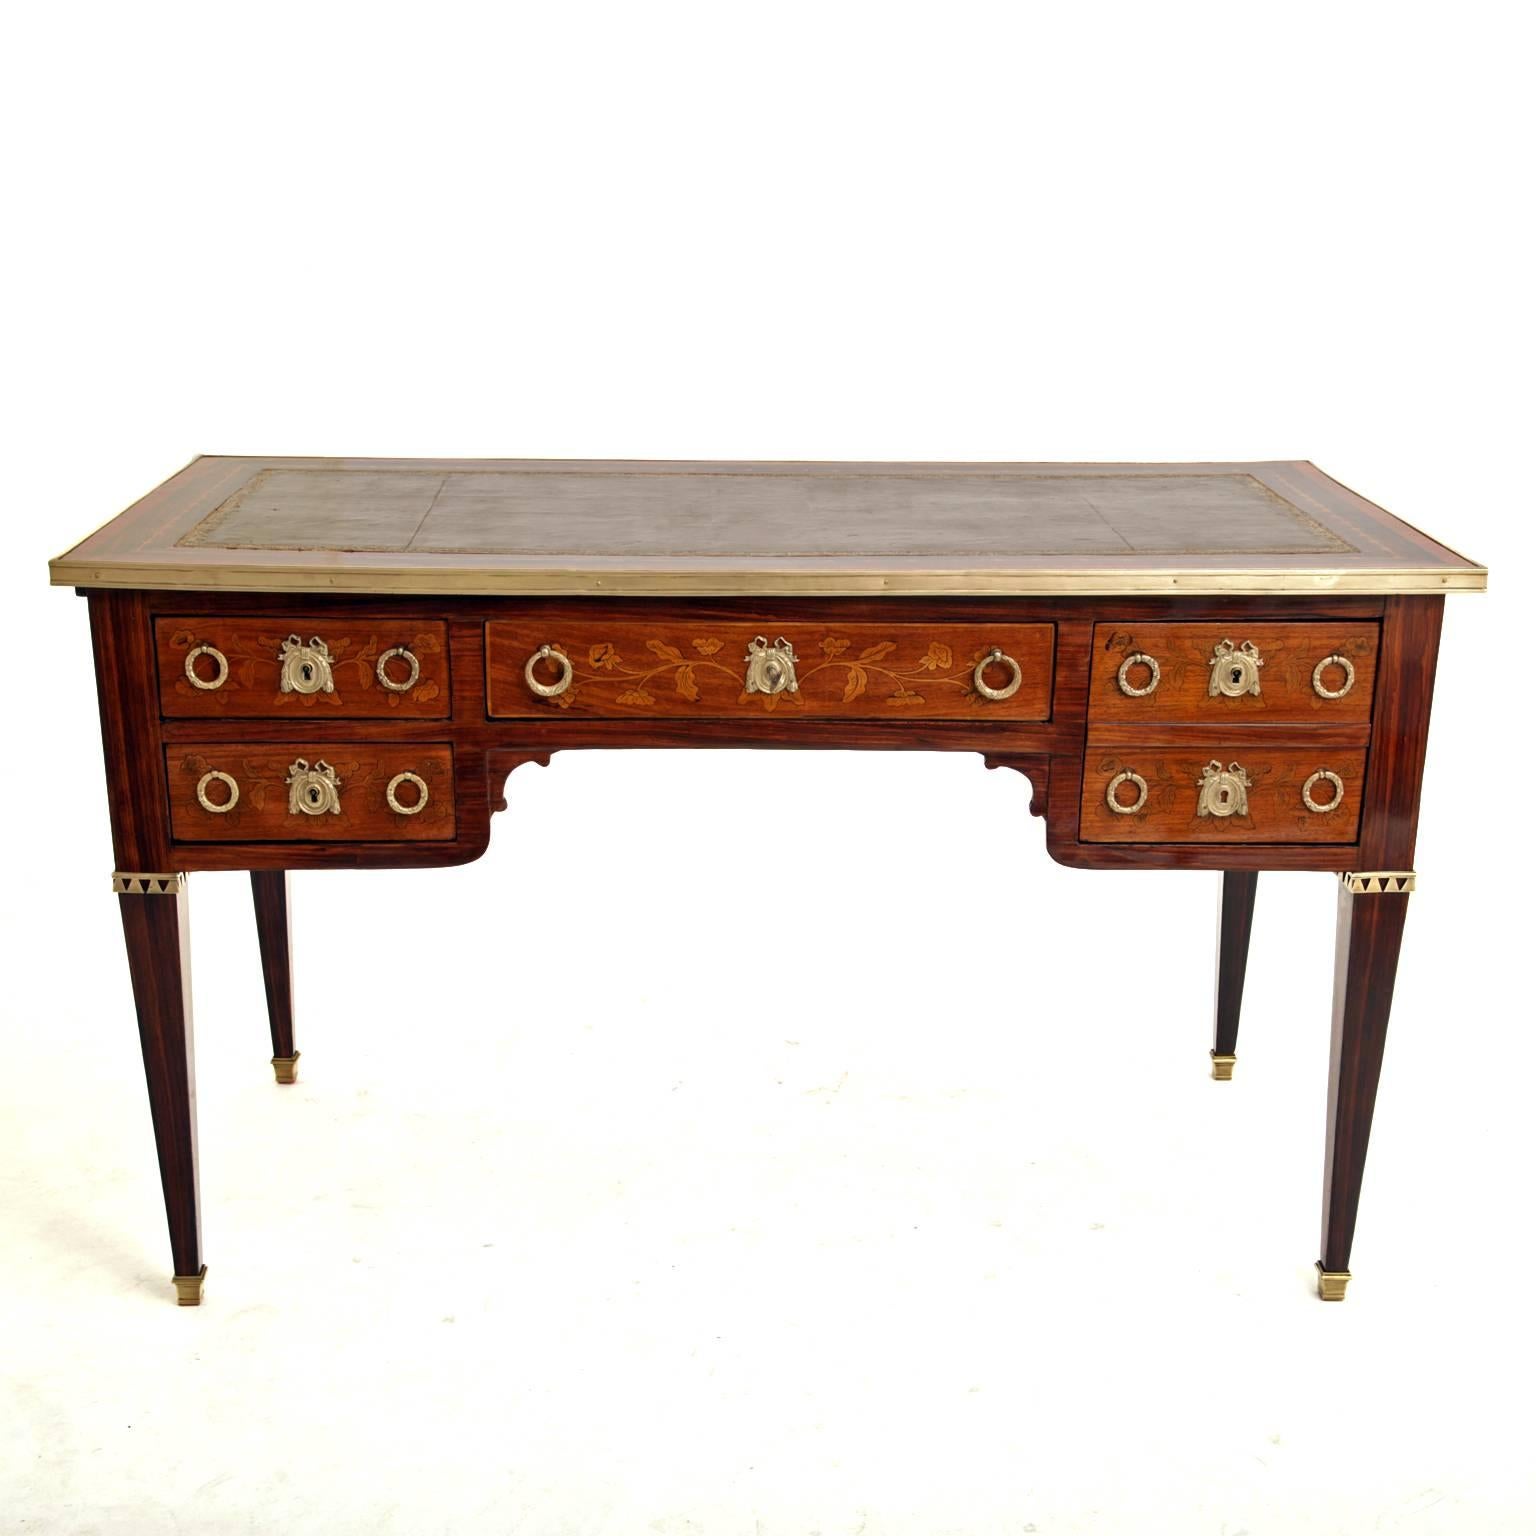 Bureau Plat in Louis-Seize-style on tapered feet with brass caps and five drawers. The edge of the tabletop is decorated with brass trim; the writing surface is covered in brown leather and inlaid with mahogany. The drawers show inlay work in the